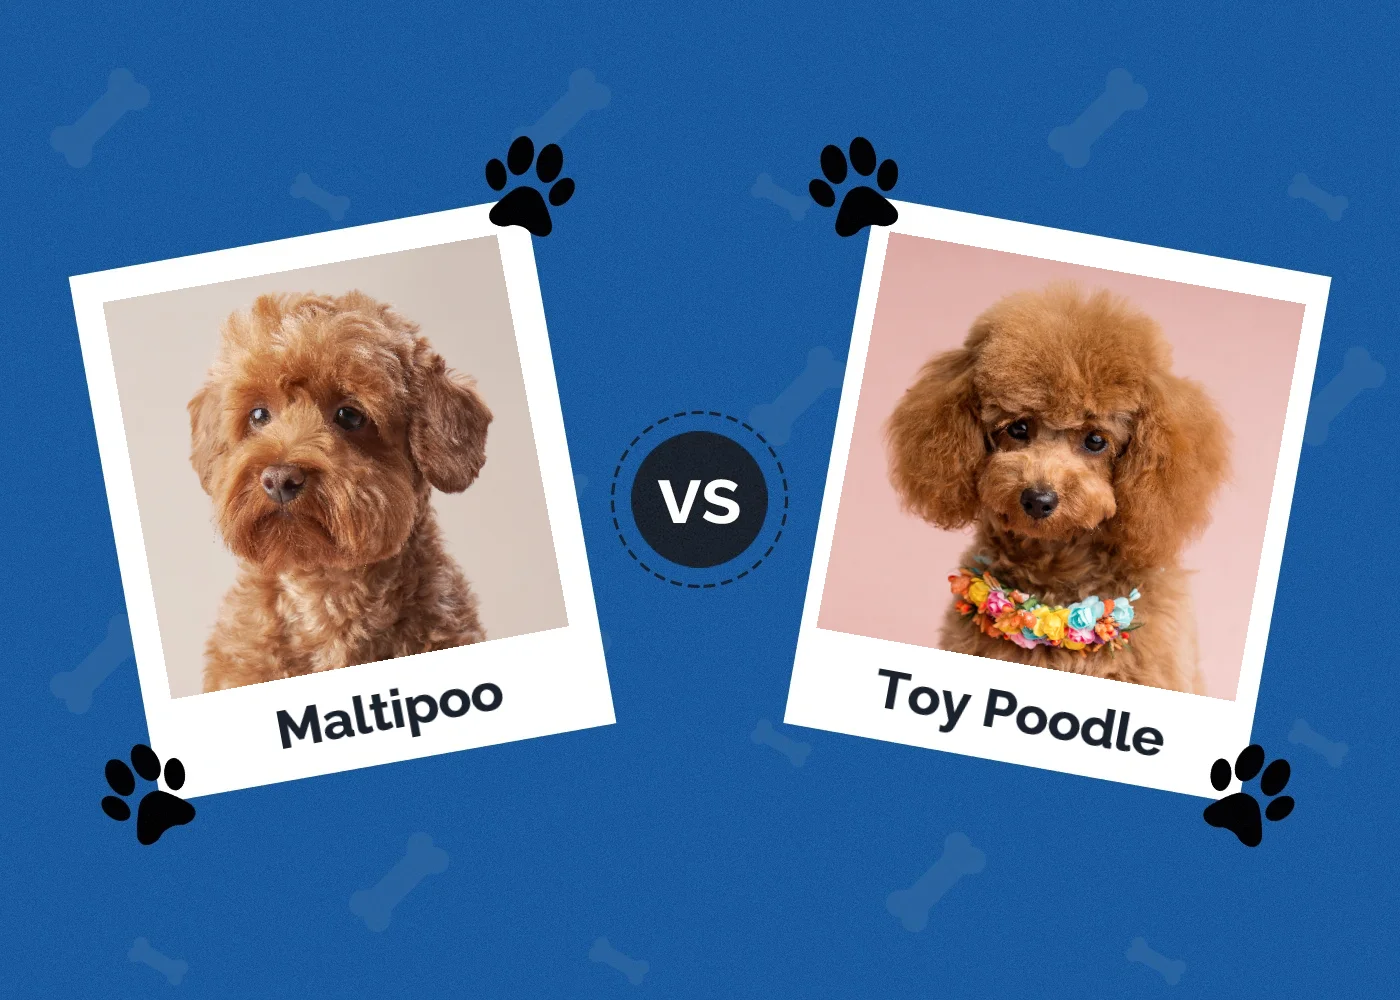 Maltipoo vs Toy Poodle - Featured Image